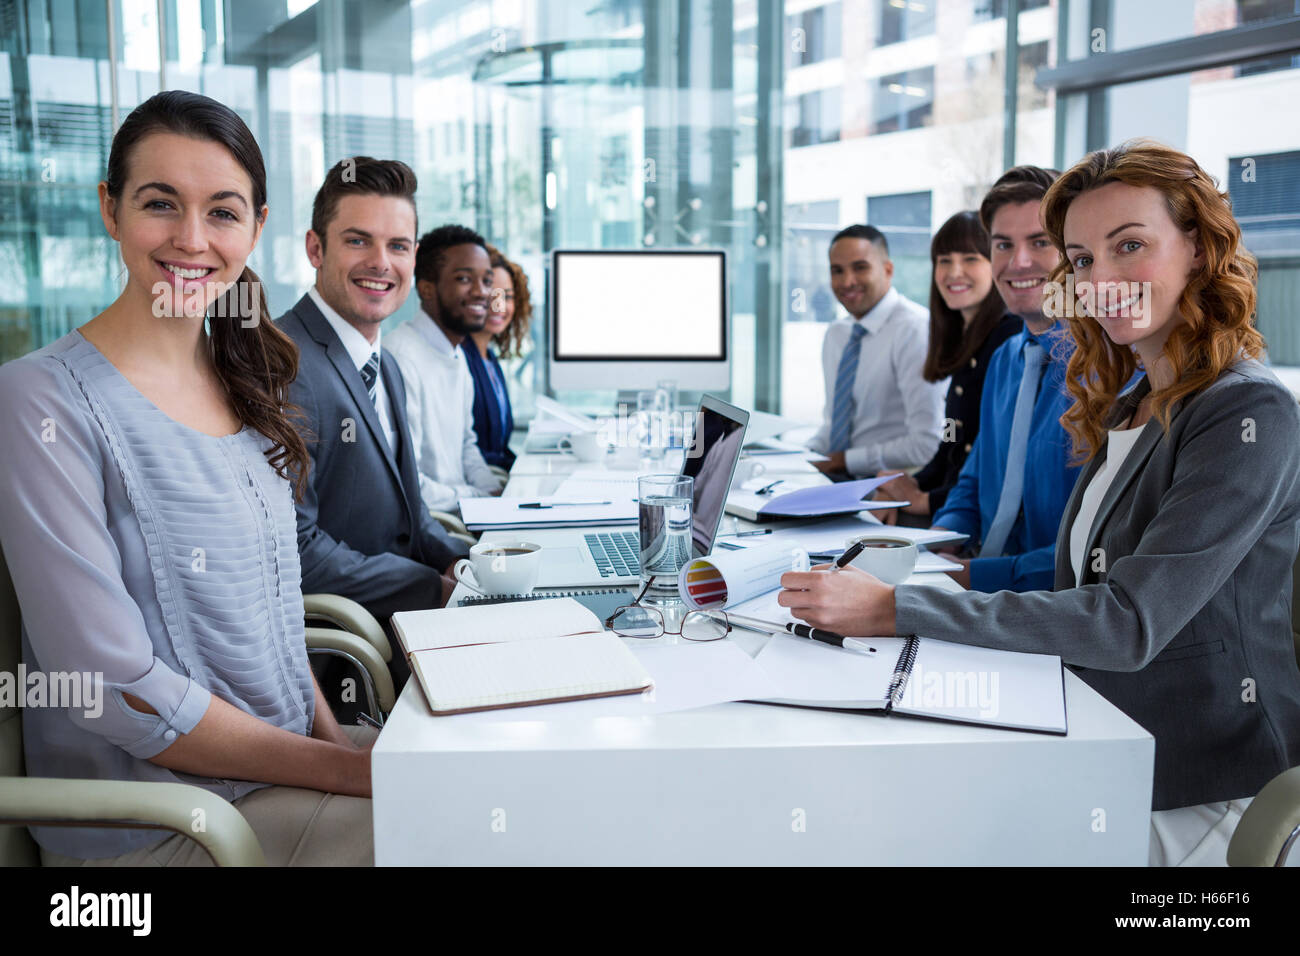 Business people looking at a screen during a video conference Stock Photo